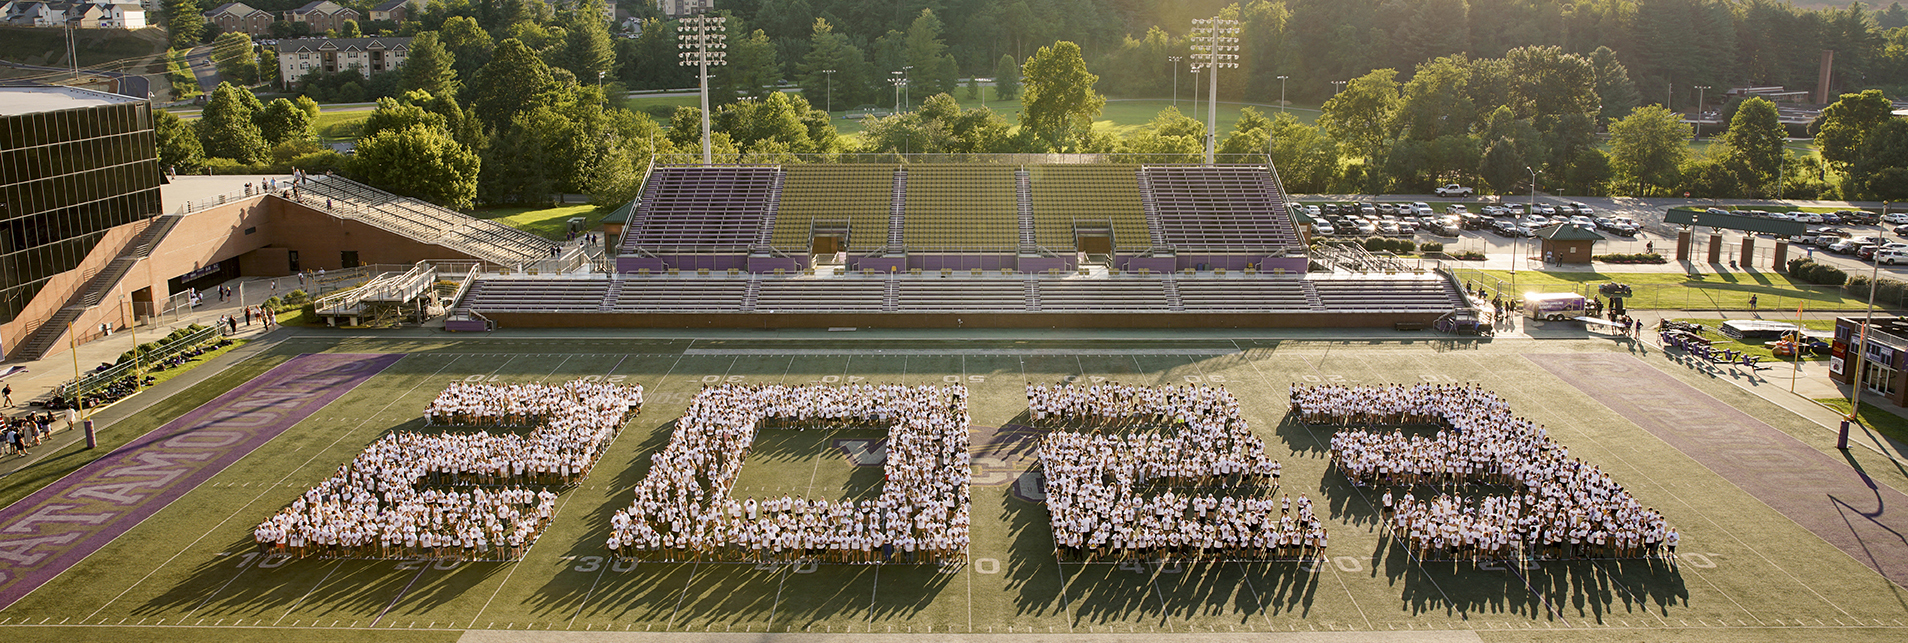 aerial photograph of the class of 2023 on the football field